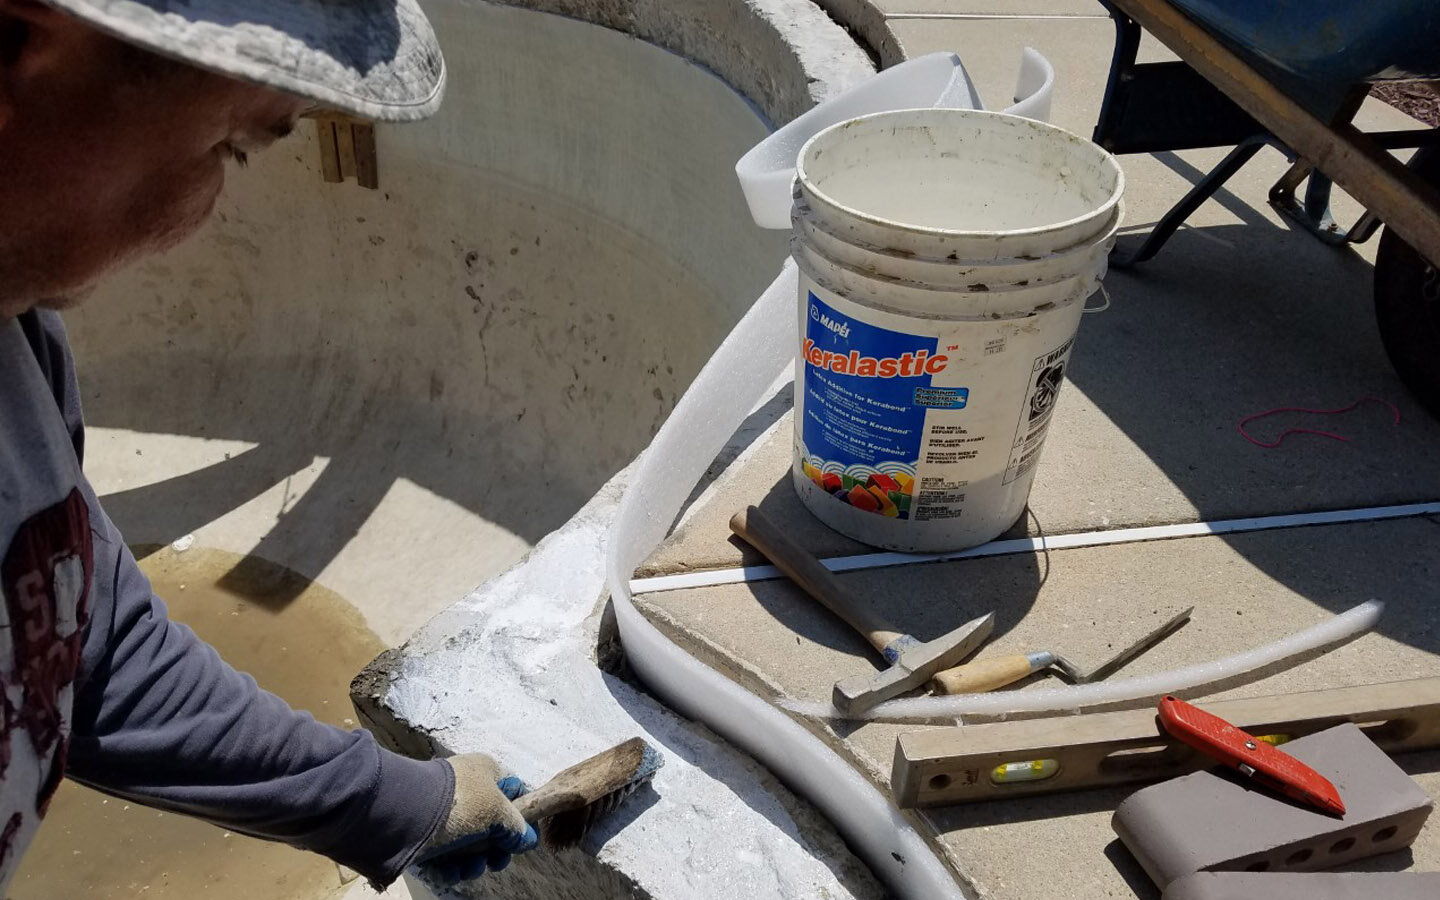  One of the keys to coping installation is to prepare the bond beam surface properly. Here you see an acrylic bonding agent being applied that "glues" the mortar bed to the beam. This process dramatically improves the life of the coping installation.